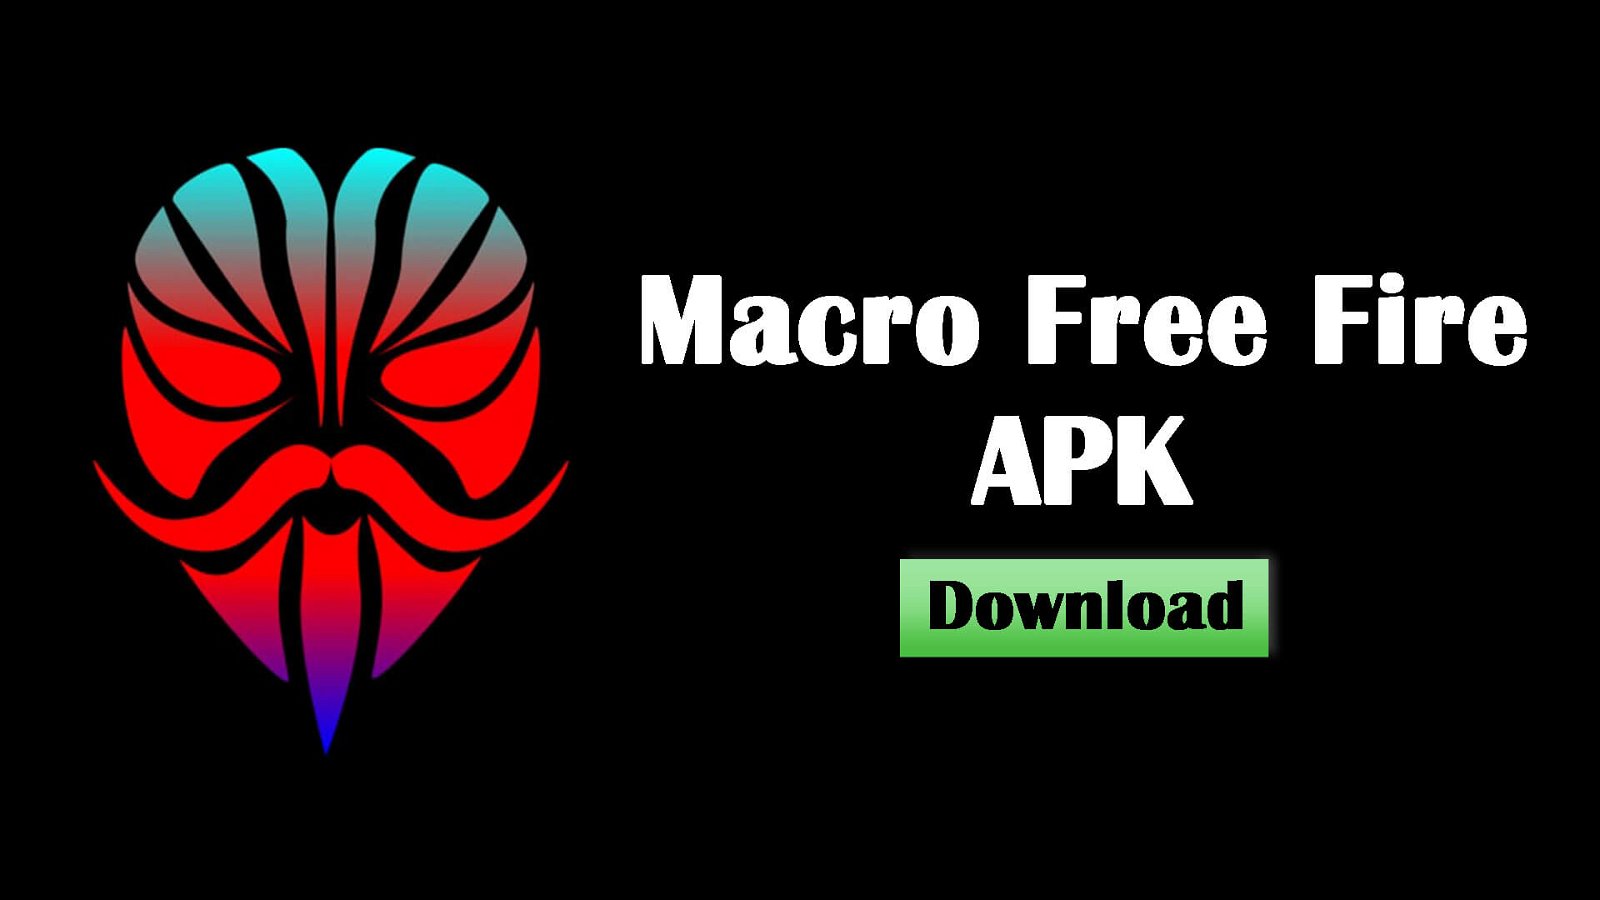 Macro Free Fire Apk Download For Android [Auto HeadShot]